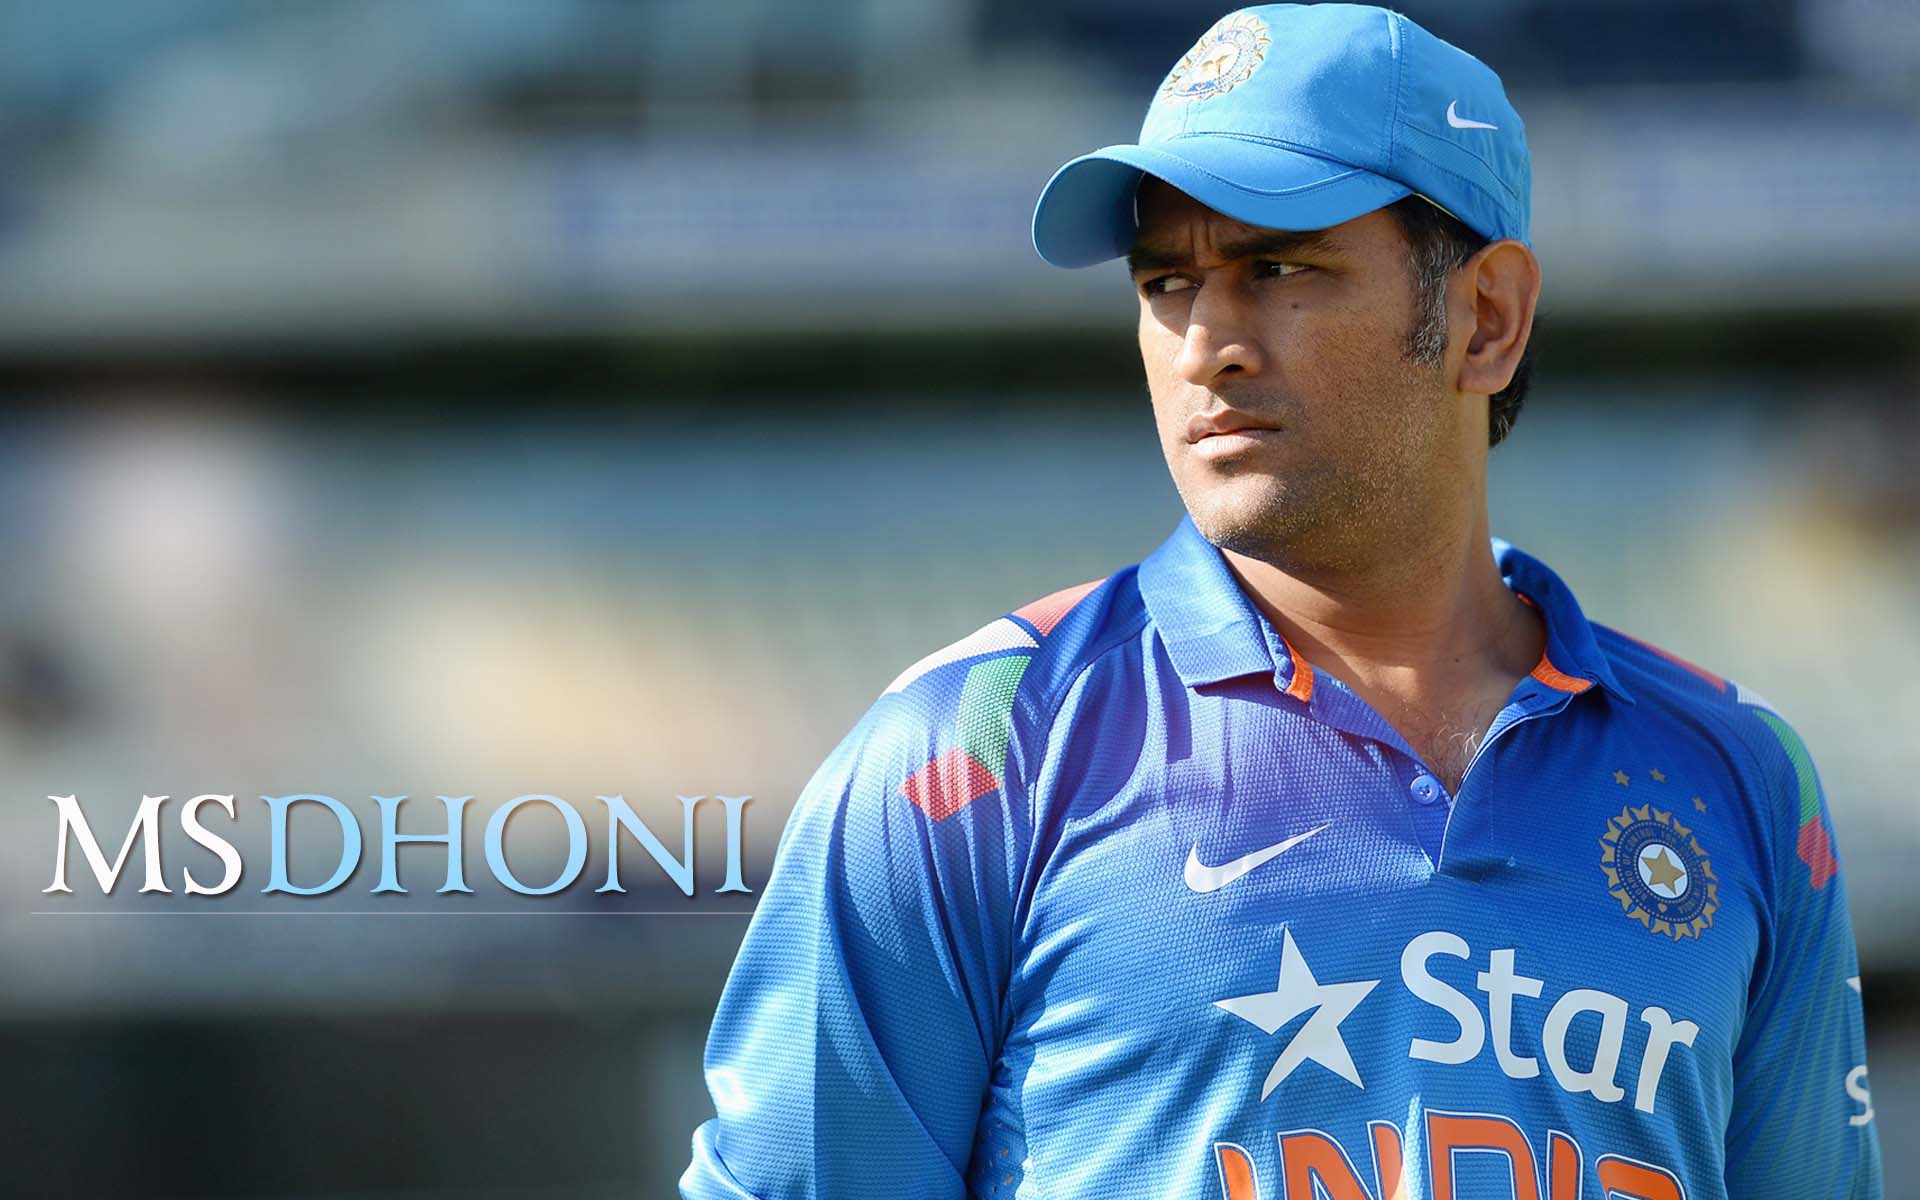 Indian cricketer hd wallpapers images and pics | Free HD Wallpapers